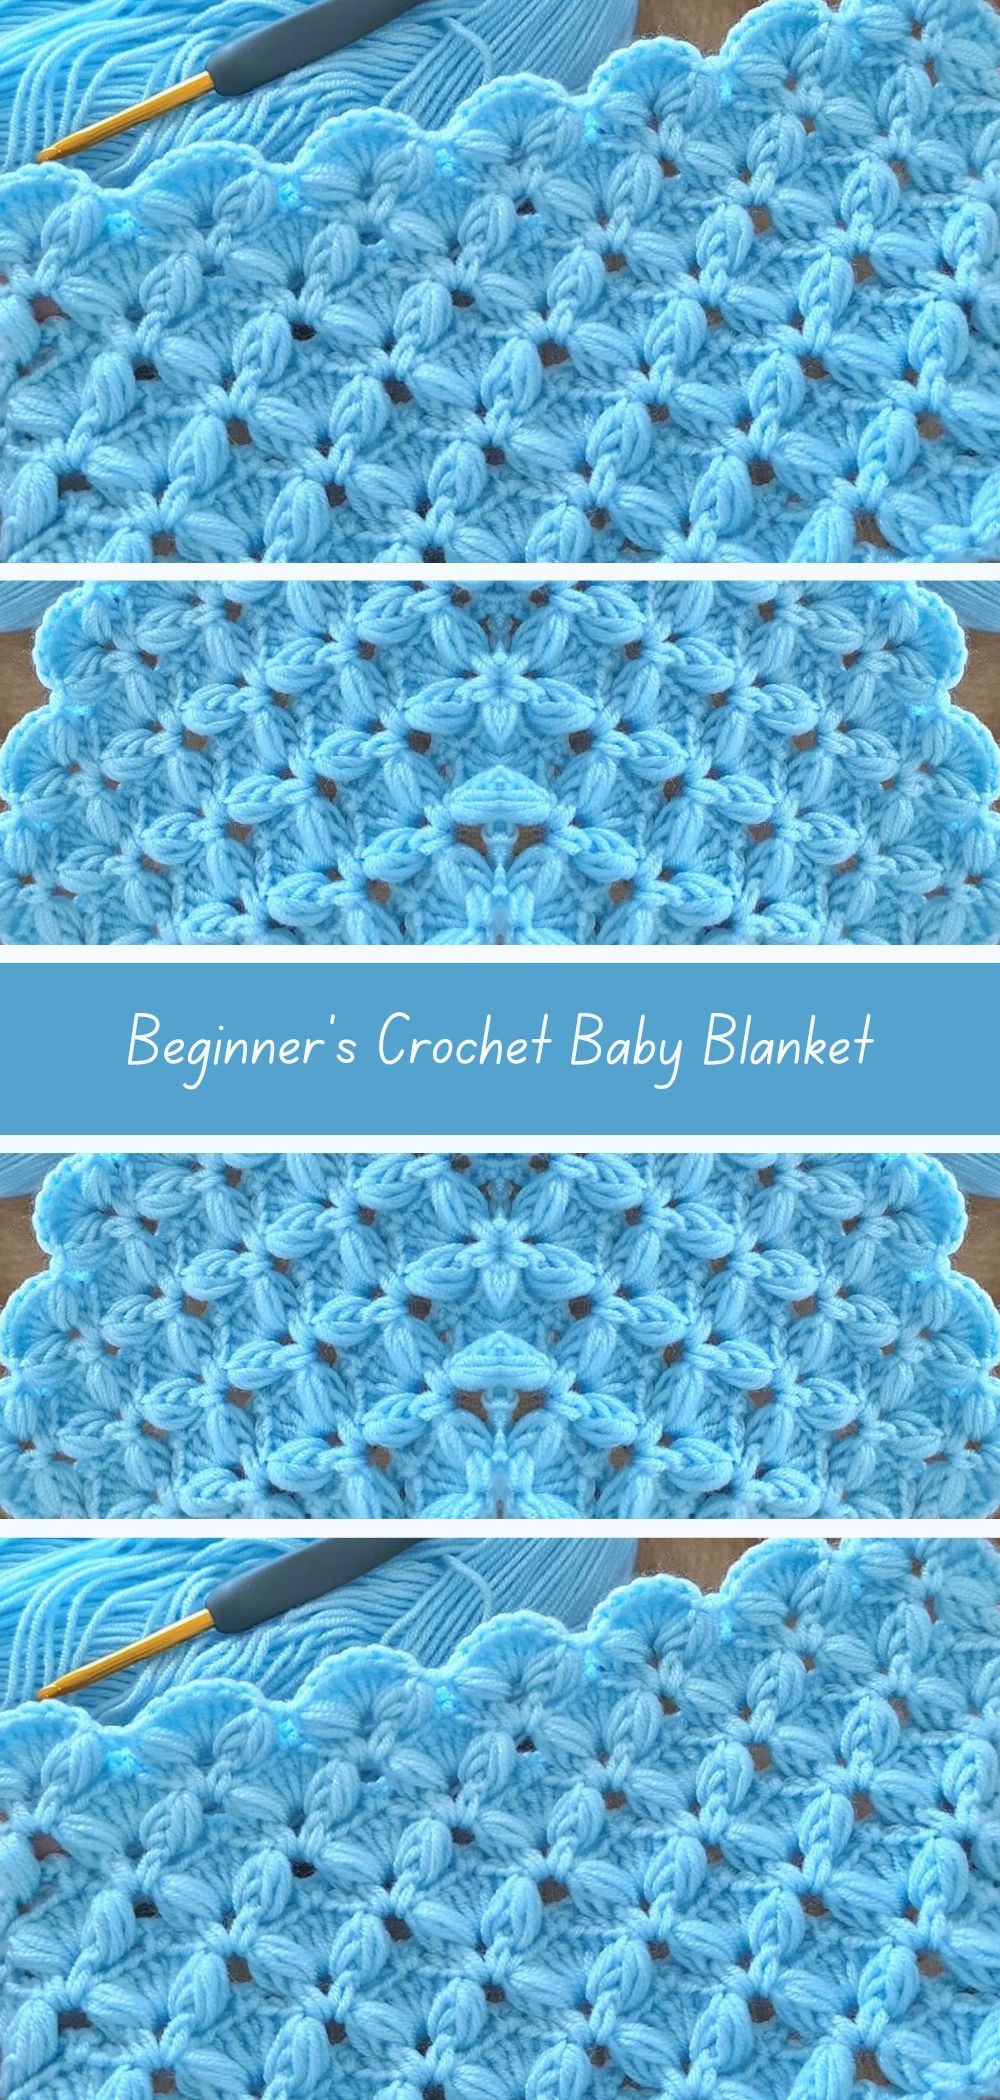 Simple Crochet Baby Blanket Tutorial - Easy-to-follow guide for crocheting a cozy and charming baby blanket